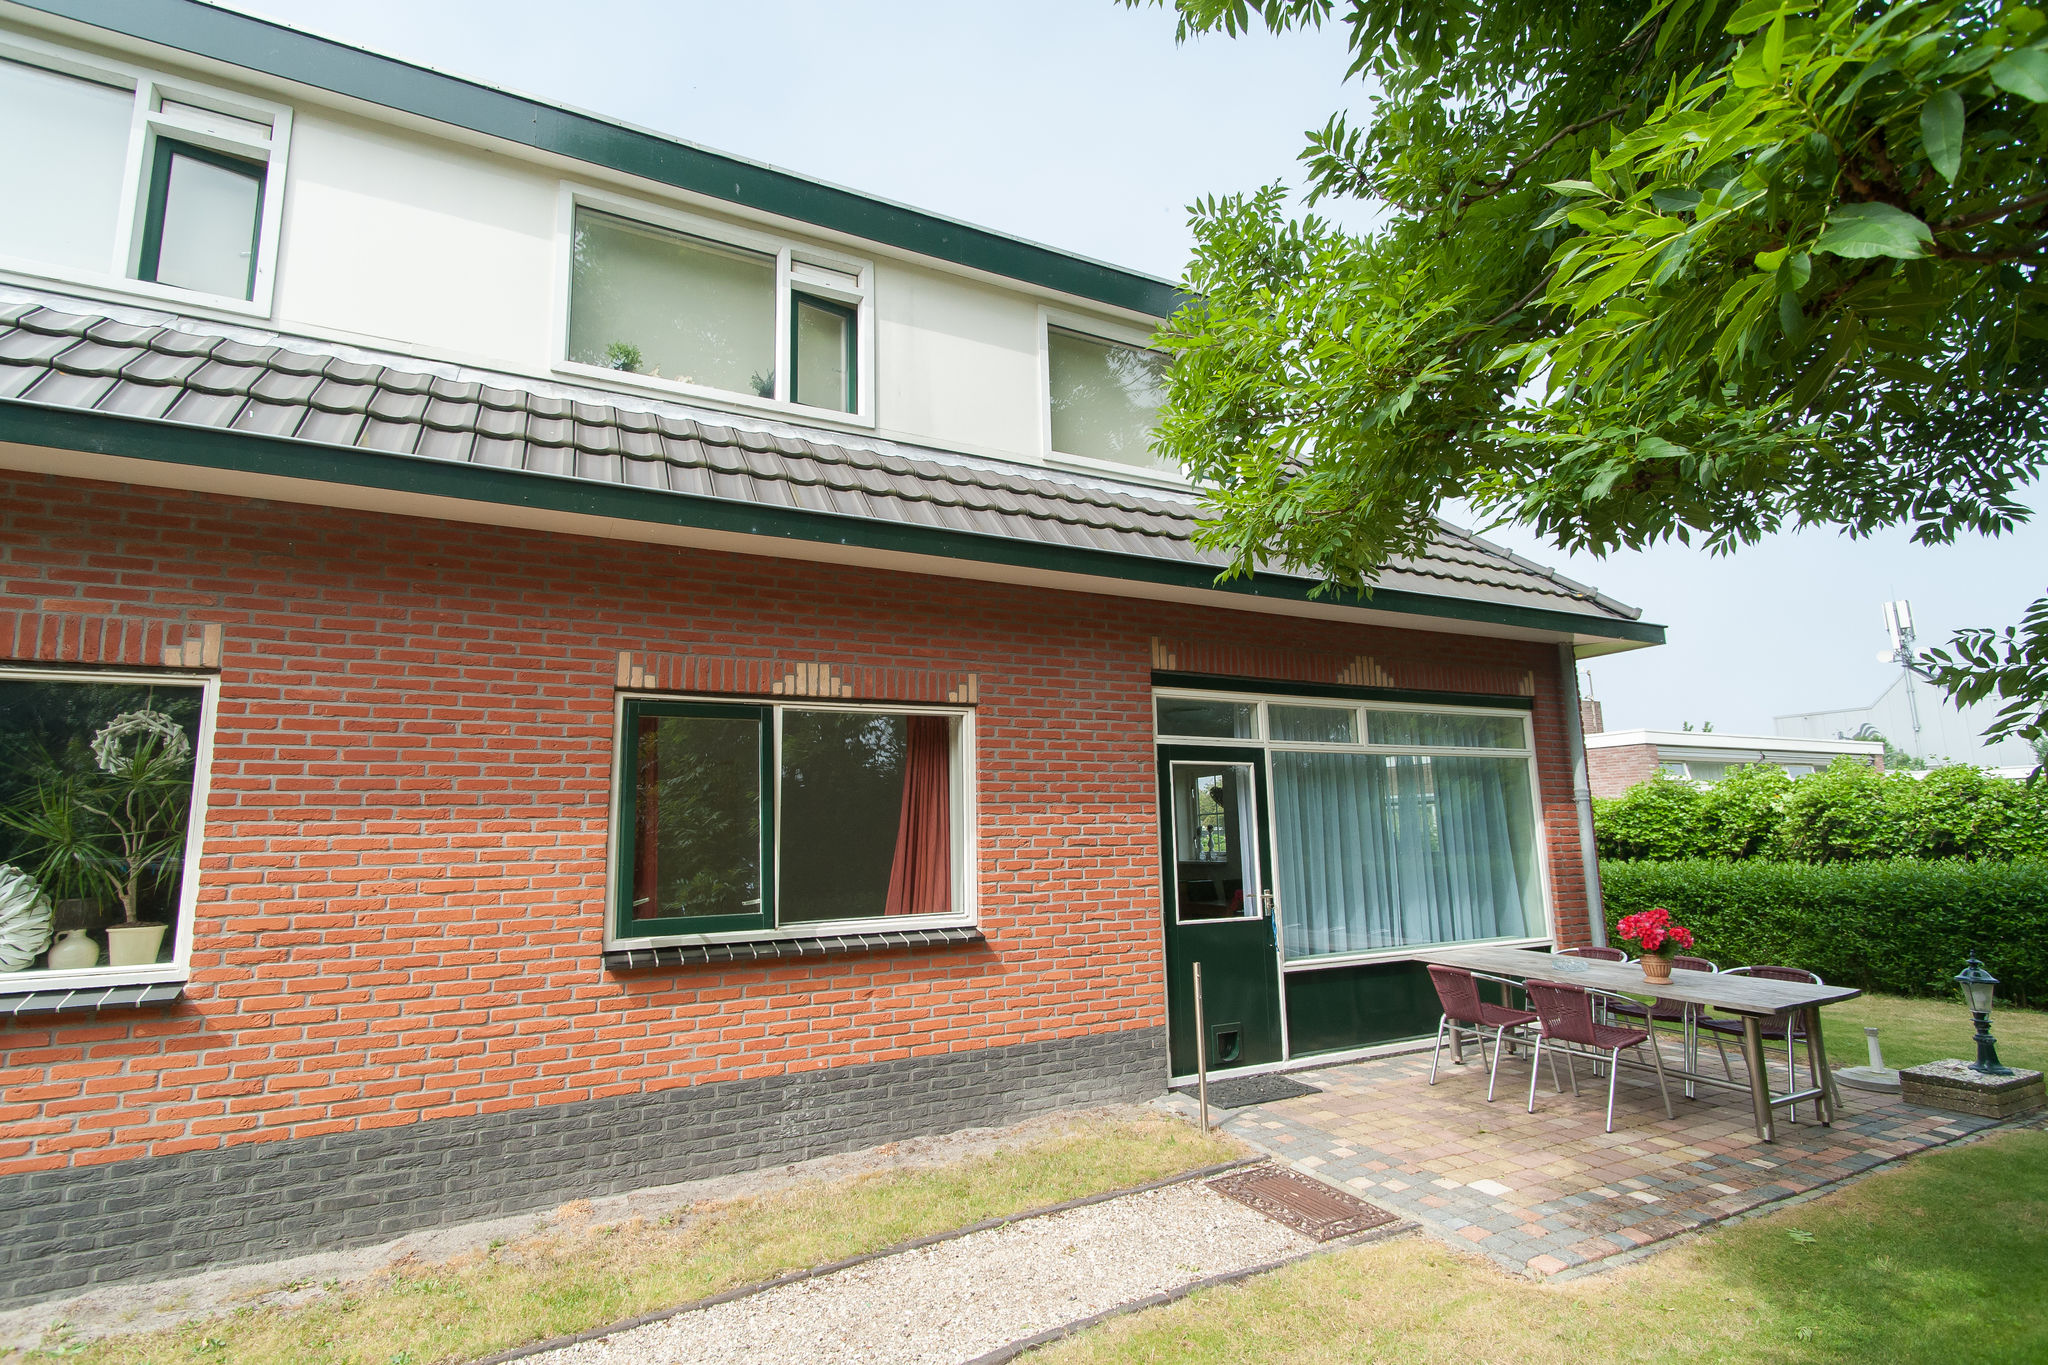 Apartment in a quiet, rural area, not far from the centre